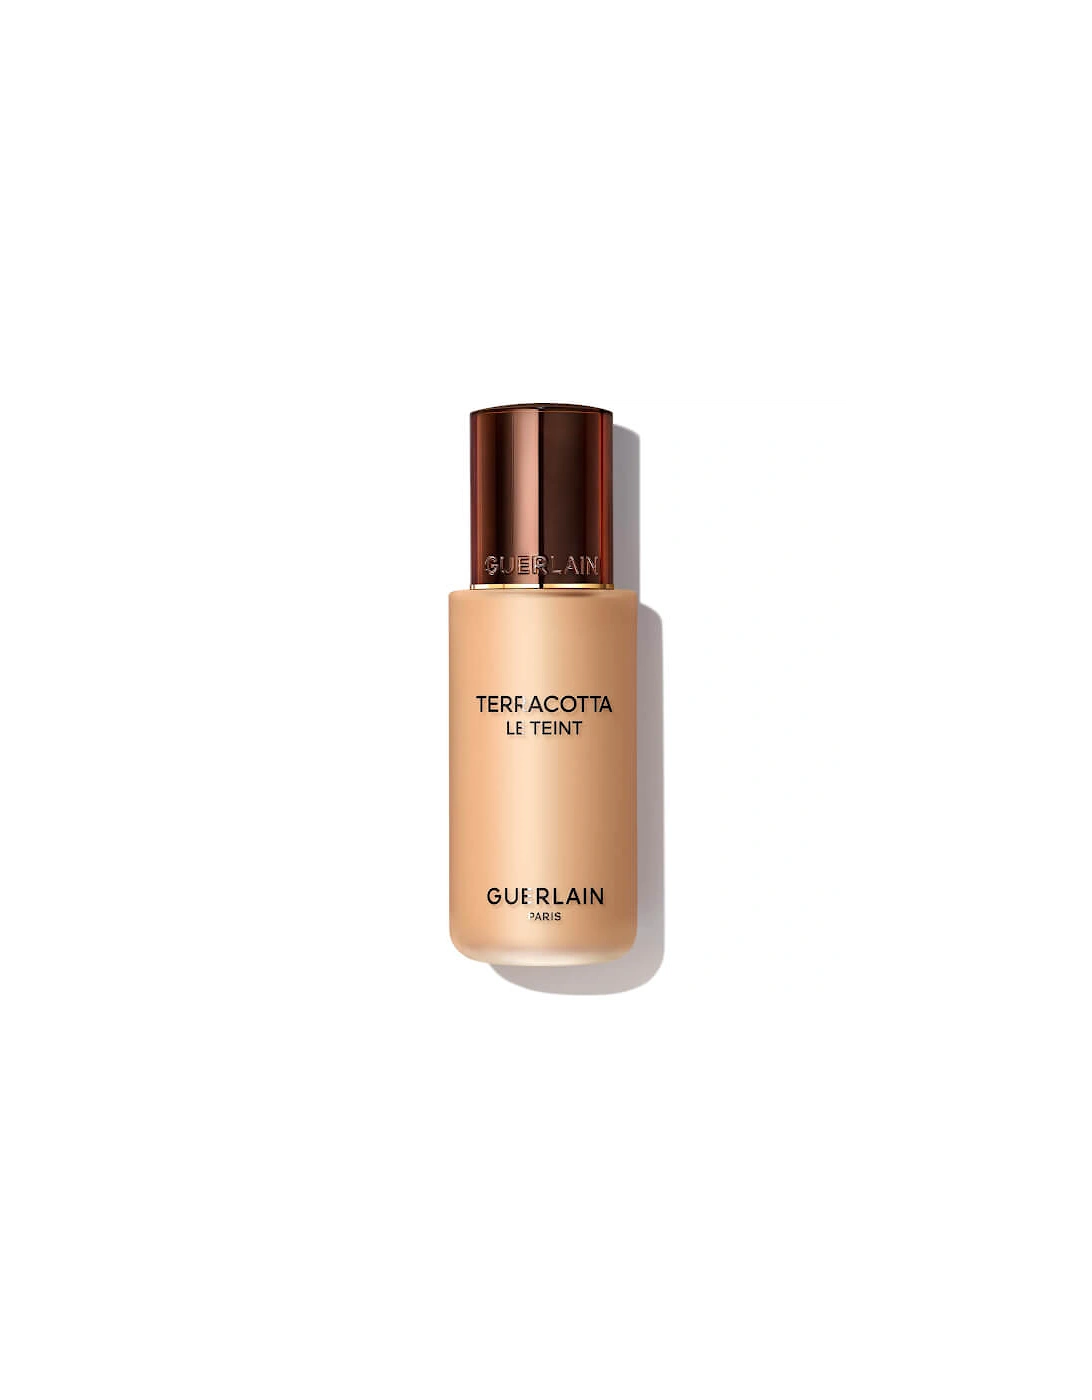 Terracotta Le Teint Healthy Glow Natural Perfection Foundation - 4W, 2 of 1